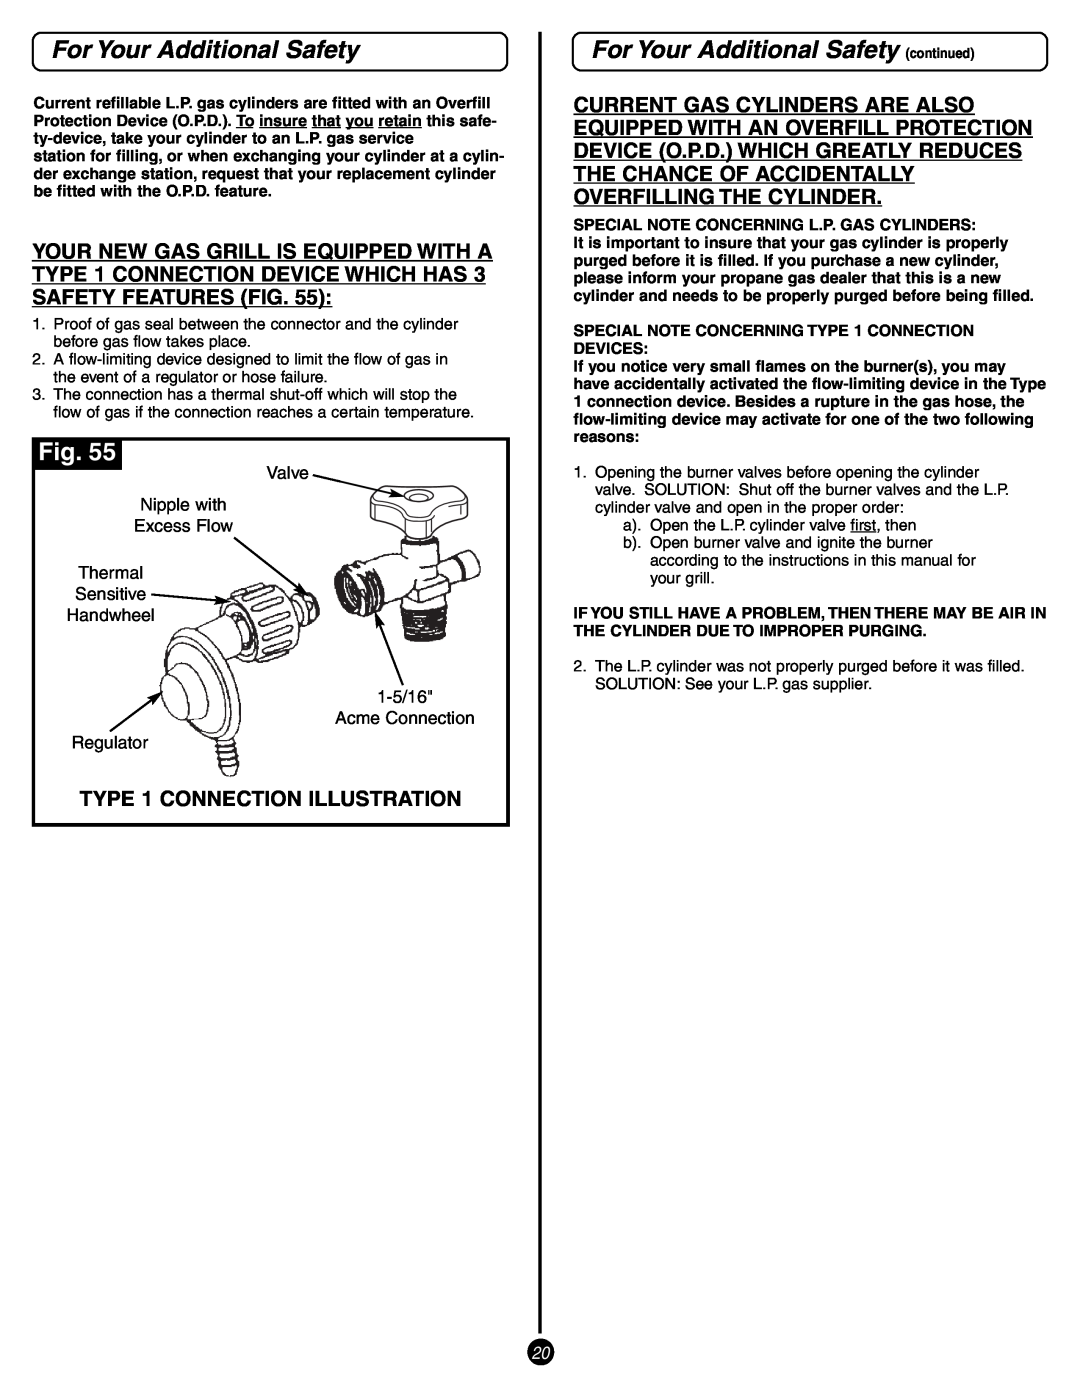 Coleman 9993 manual For Your Additional Safety continued, TYPE 1 CONNECTION ILLUSTRATION 